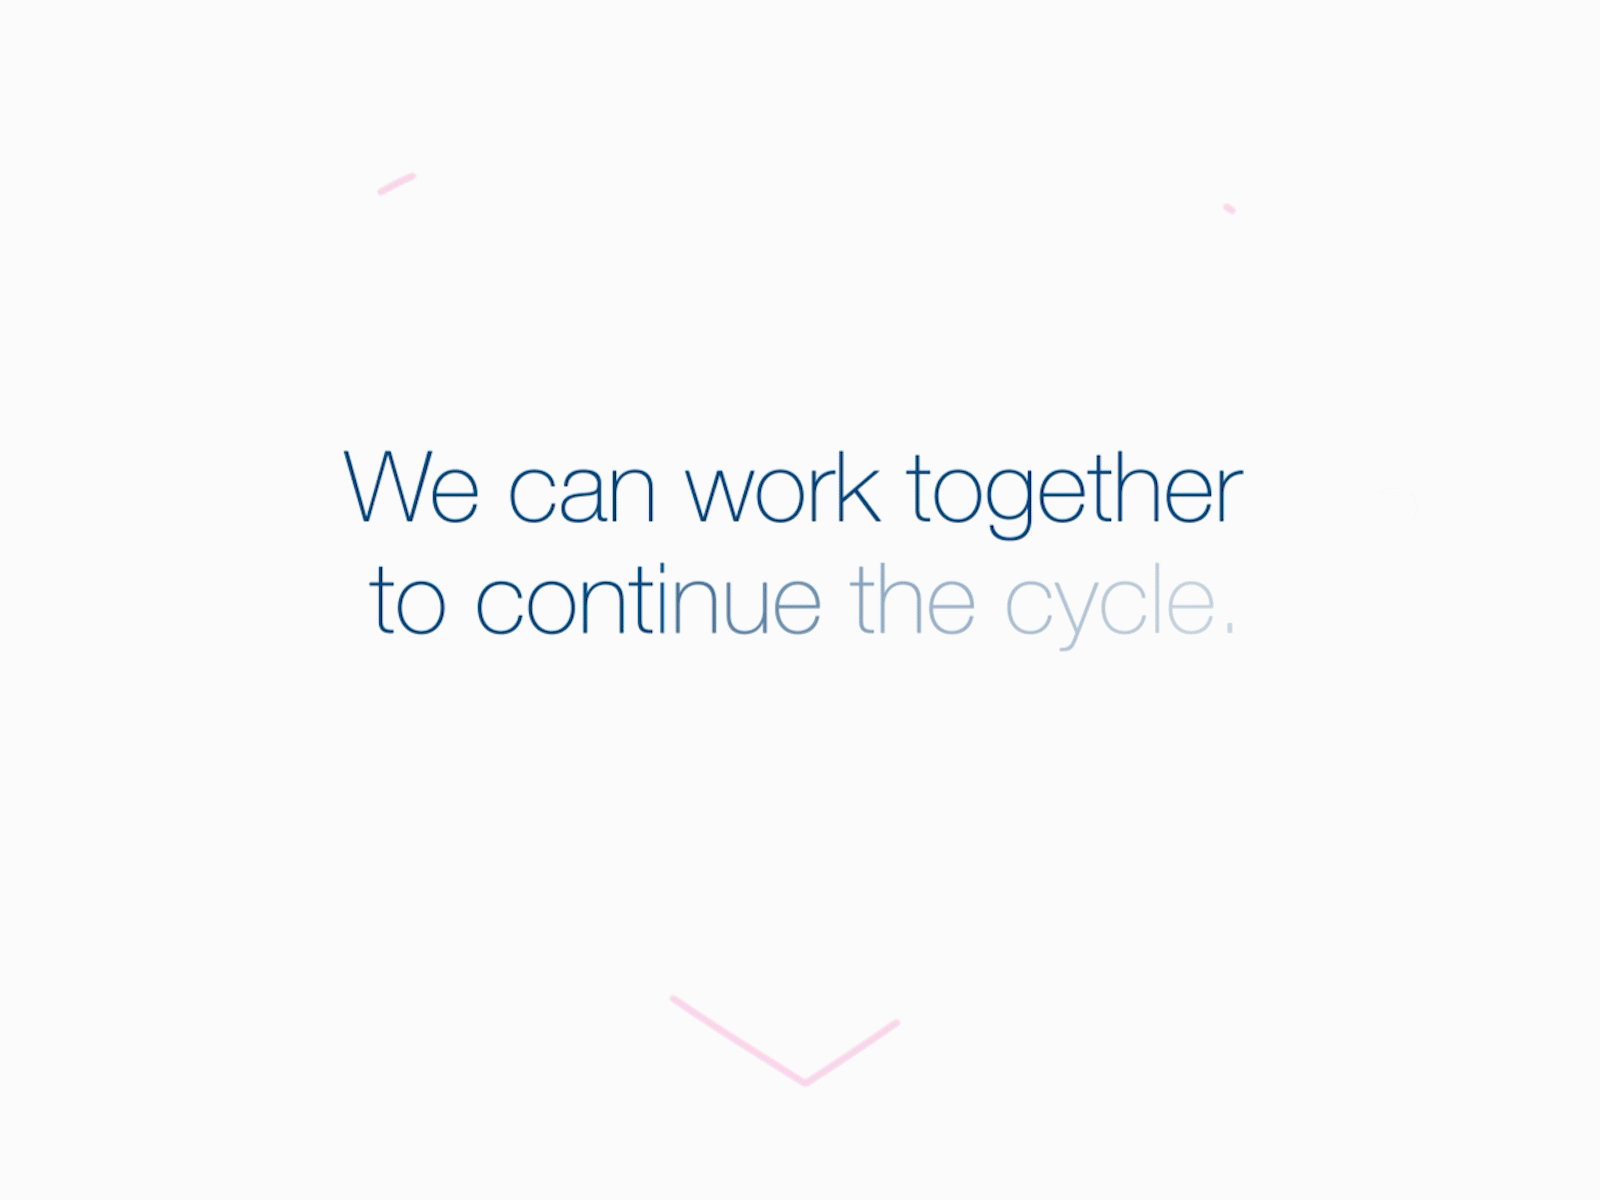 Dove - We can work together to continue the cycle